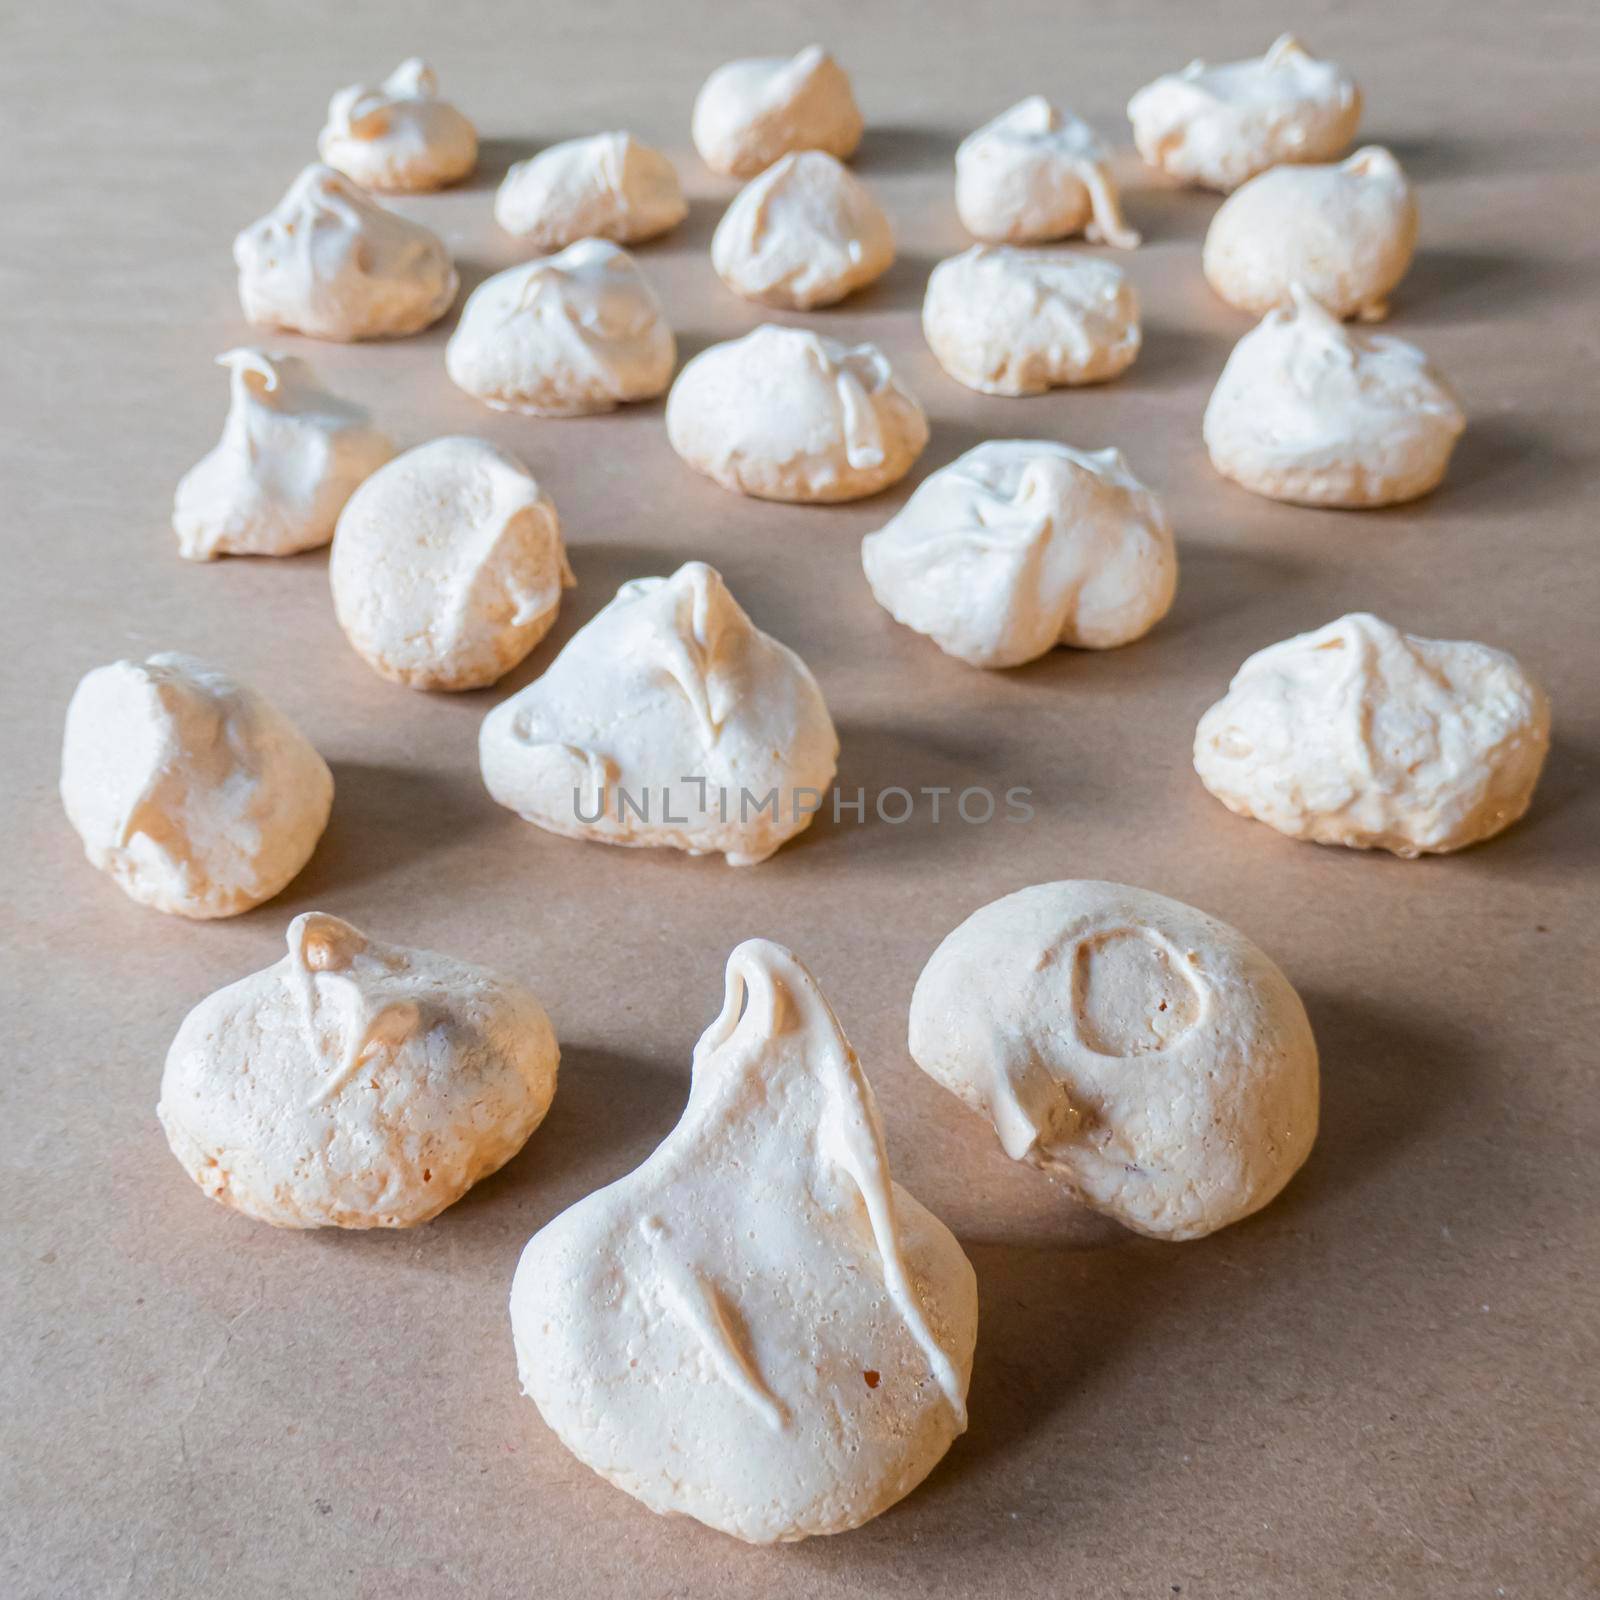 Homemade french milk-colored meringues on crumpled craft paper by kajasja